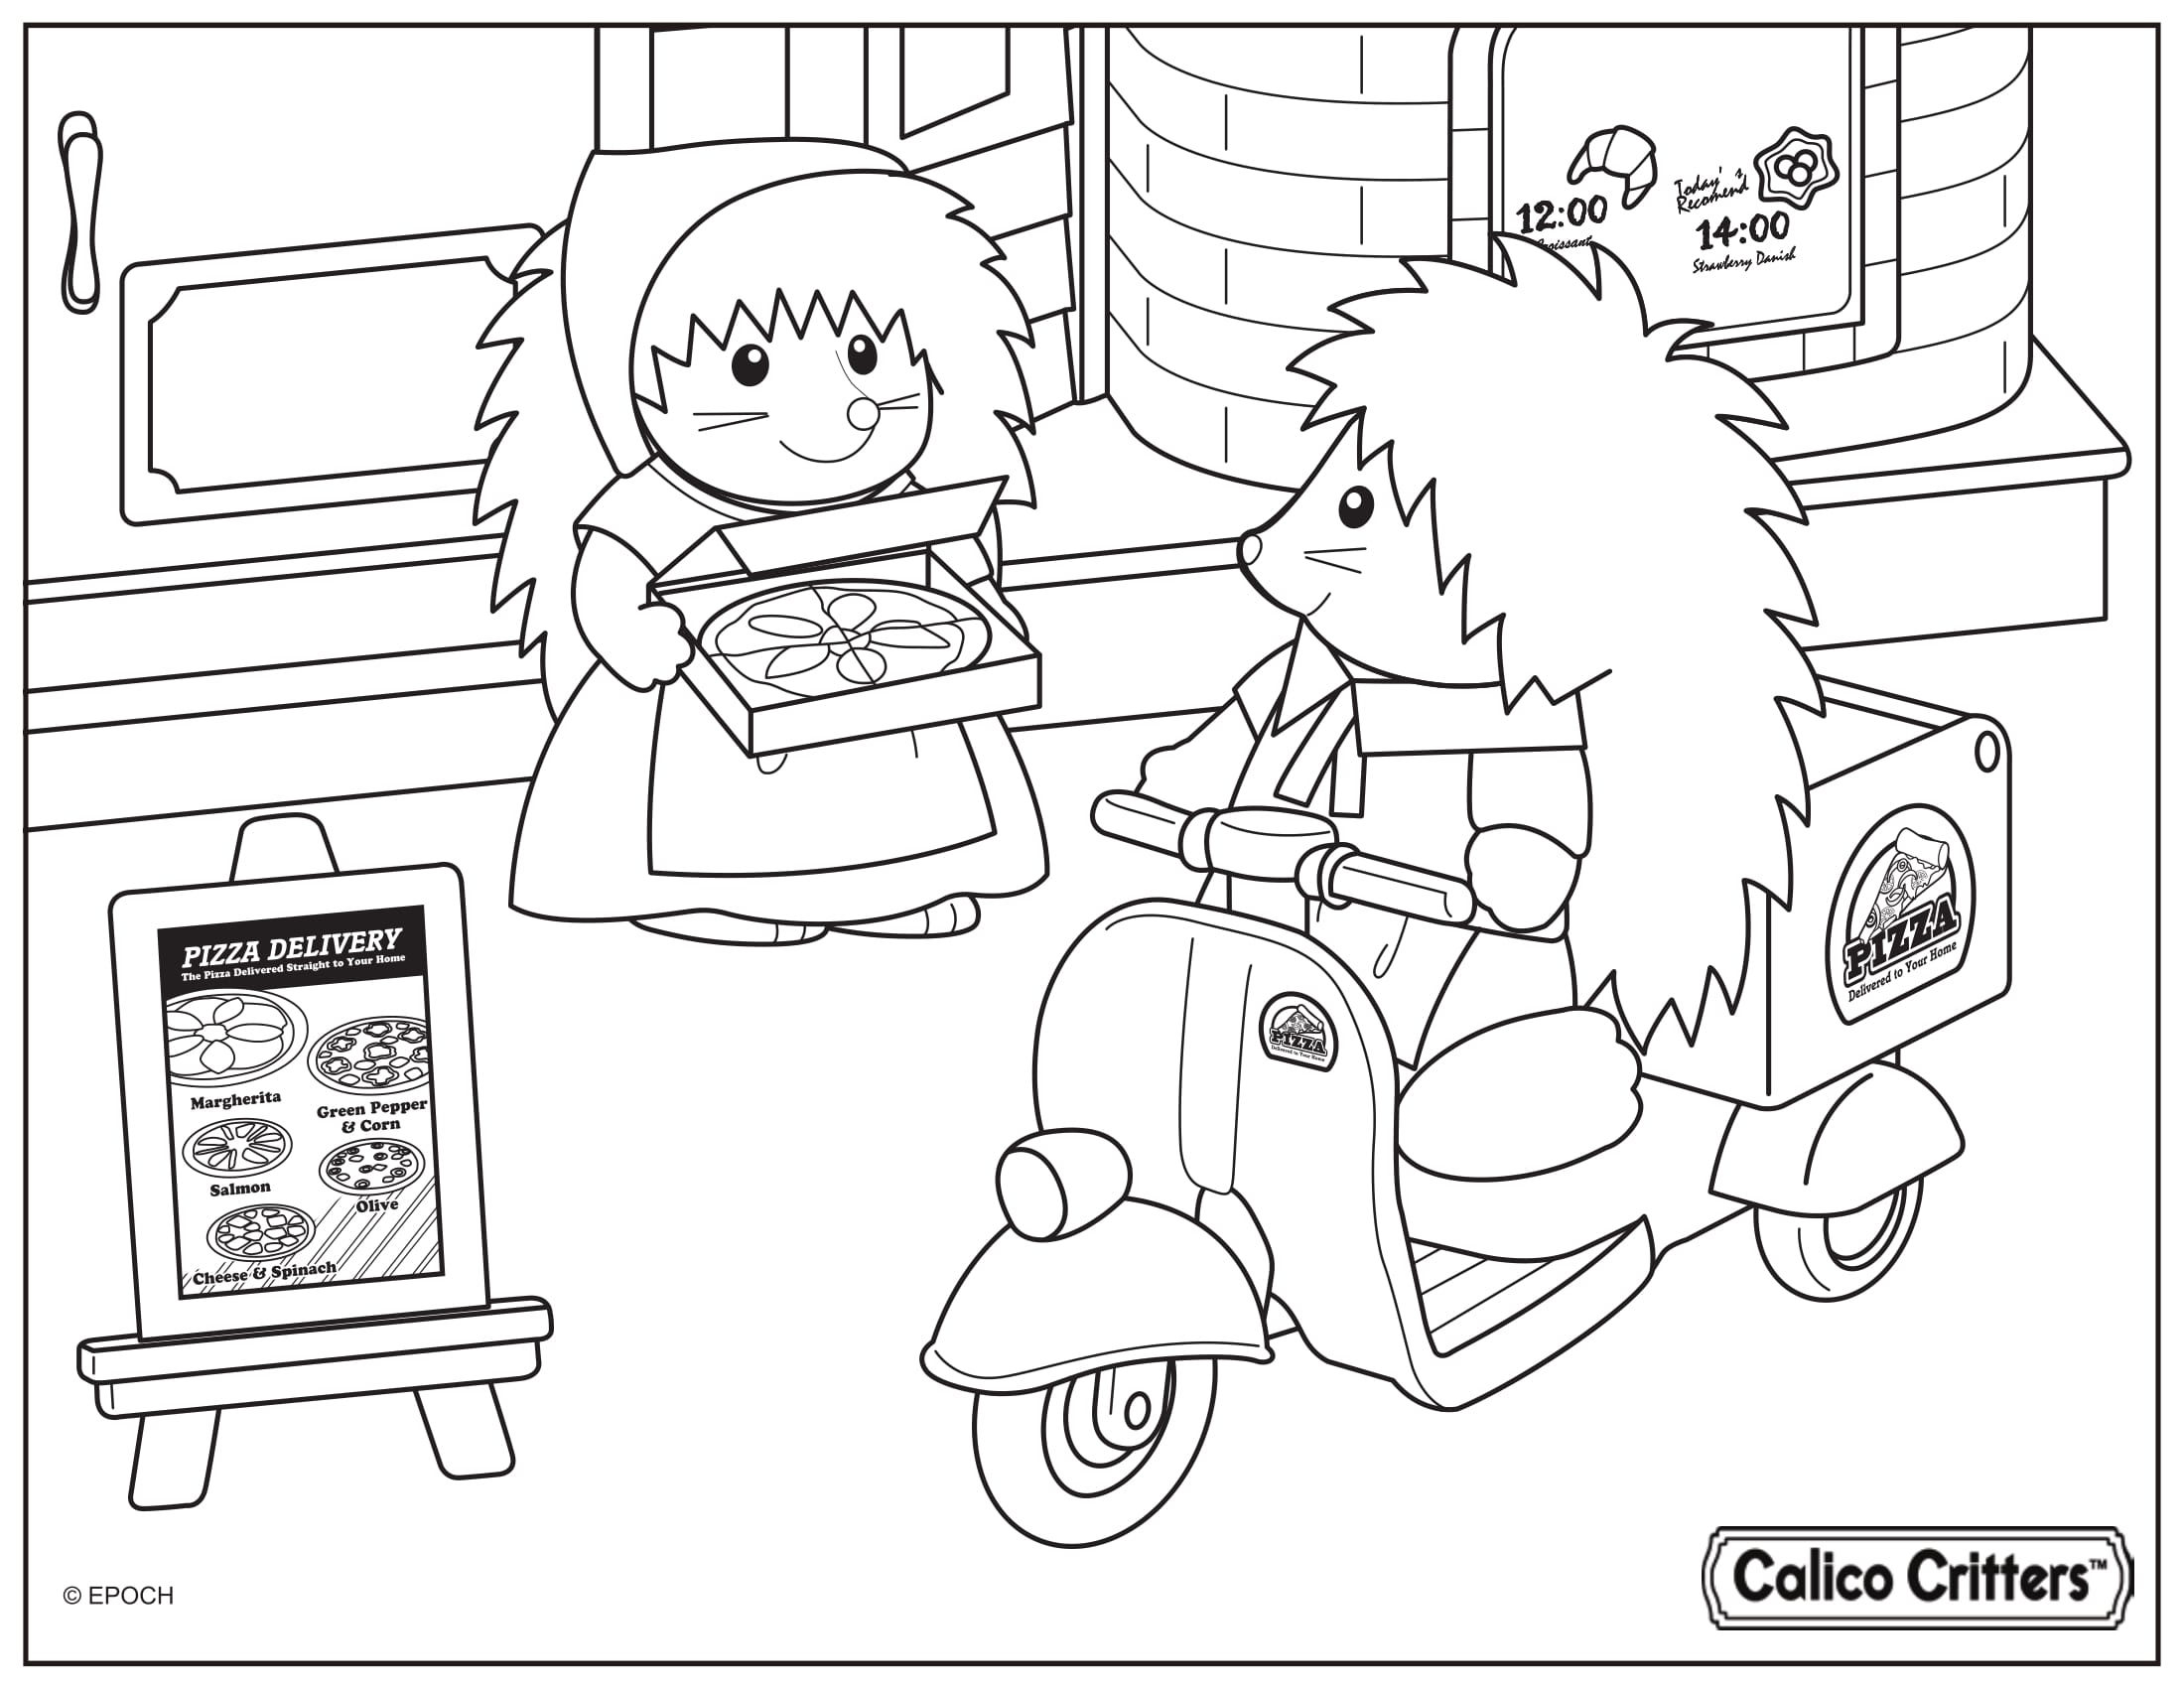 Calico Critters Pizza Delivery Coloring Pages - Coloring Cool